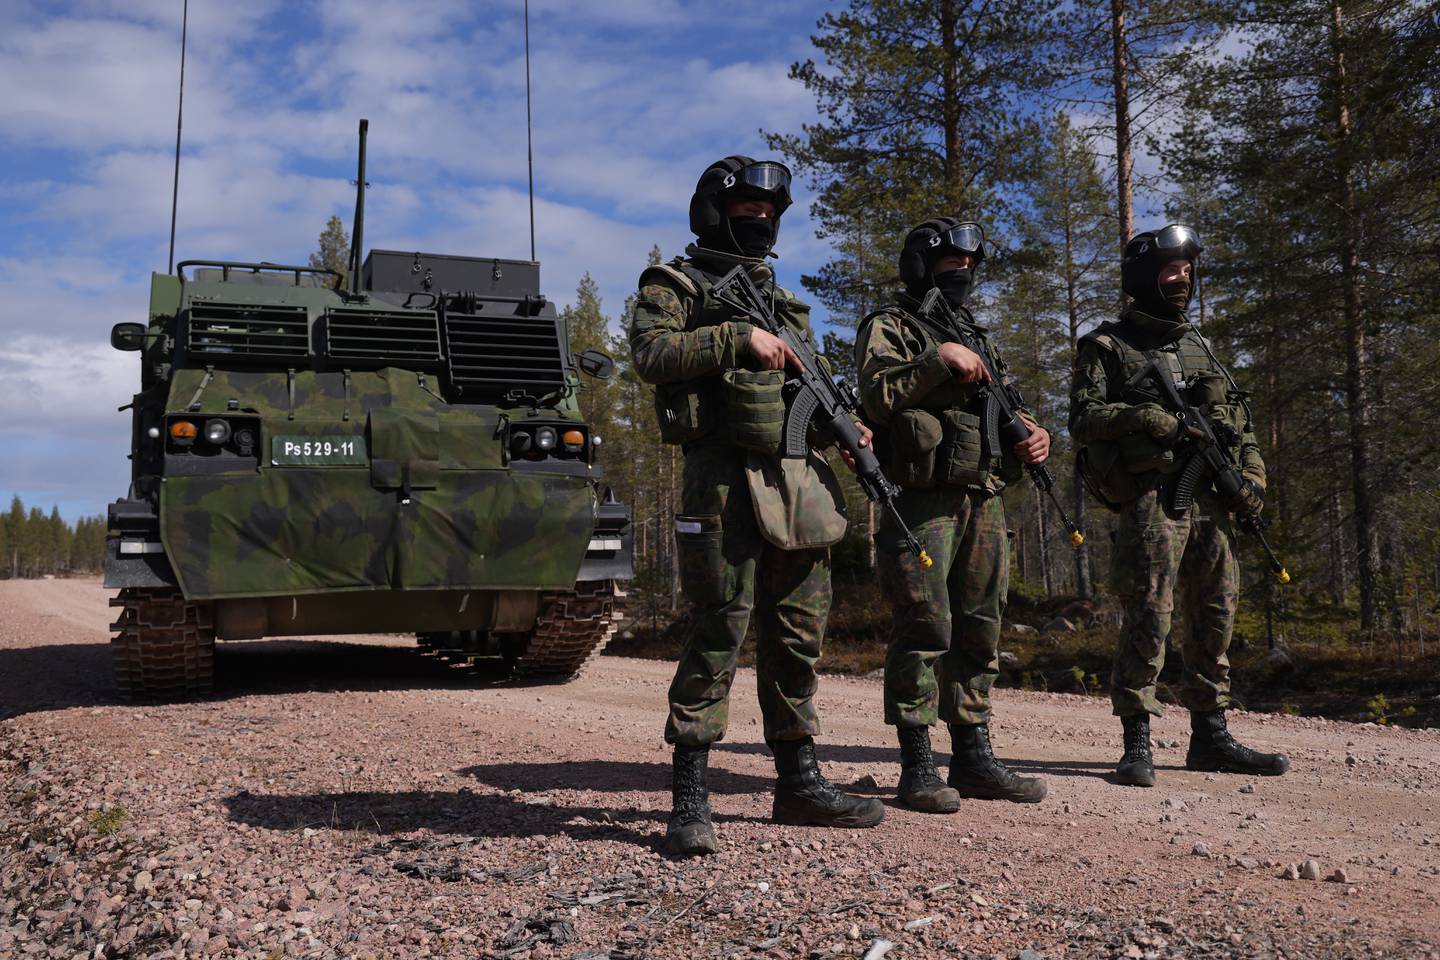 Finnish soldiers stand next to an M270 MLRS heavy rocket launcher during exercises at training grounds near Rovaniemi, in Finland. Getty Images